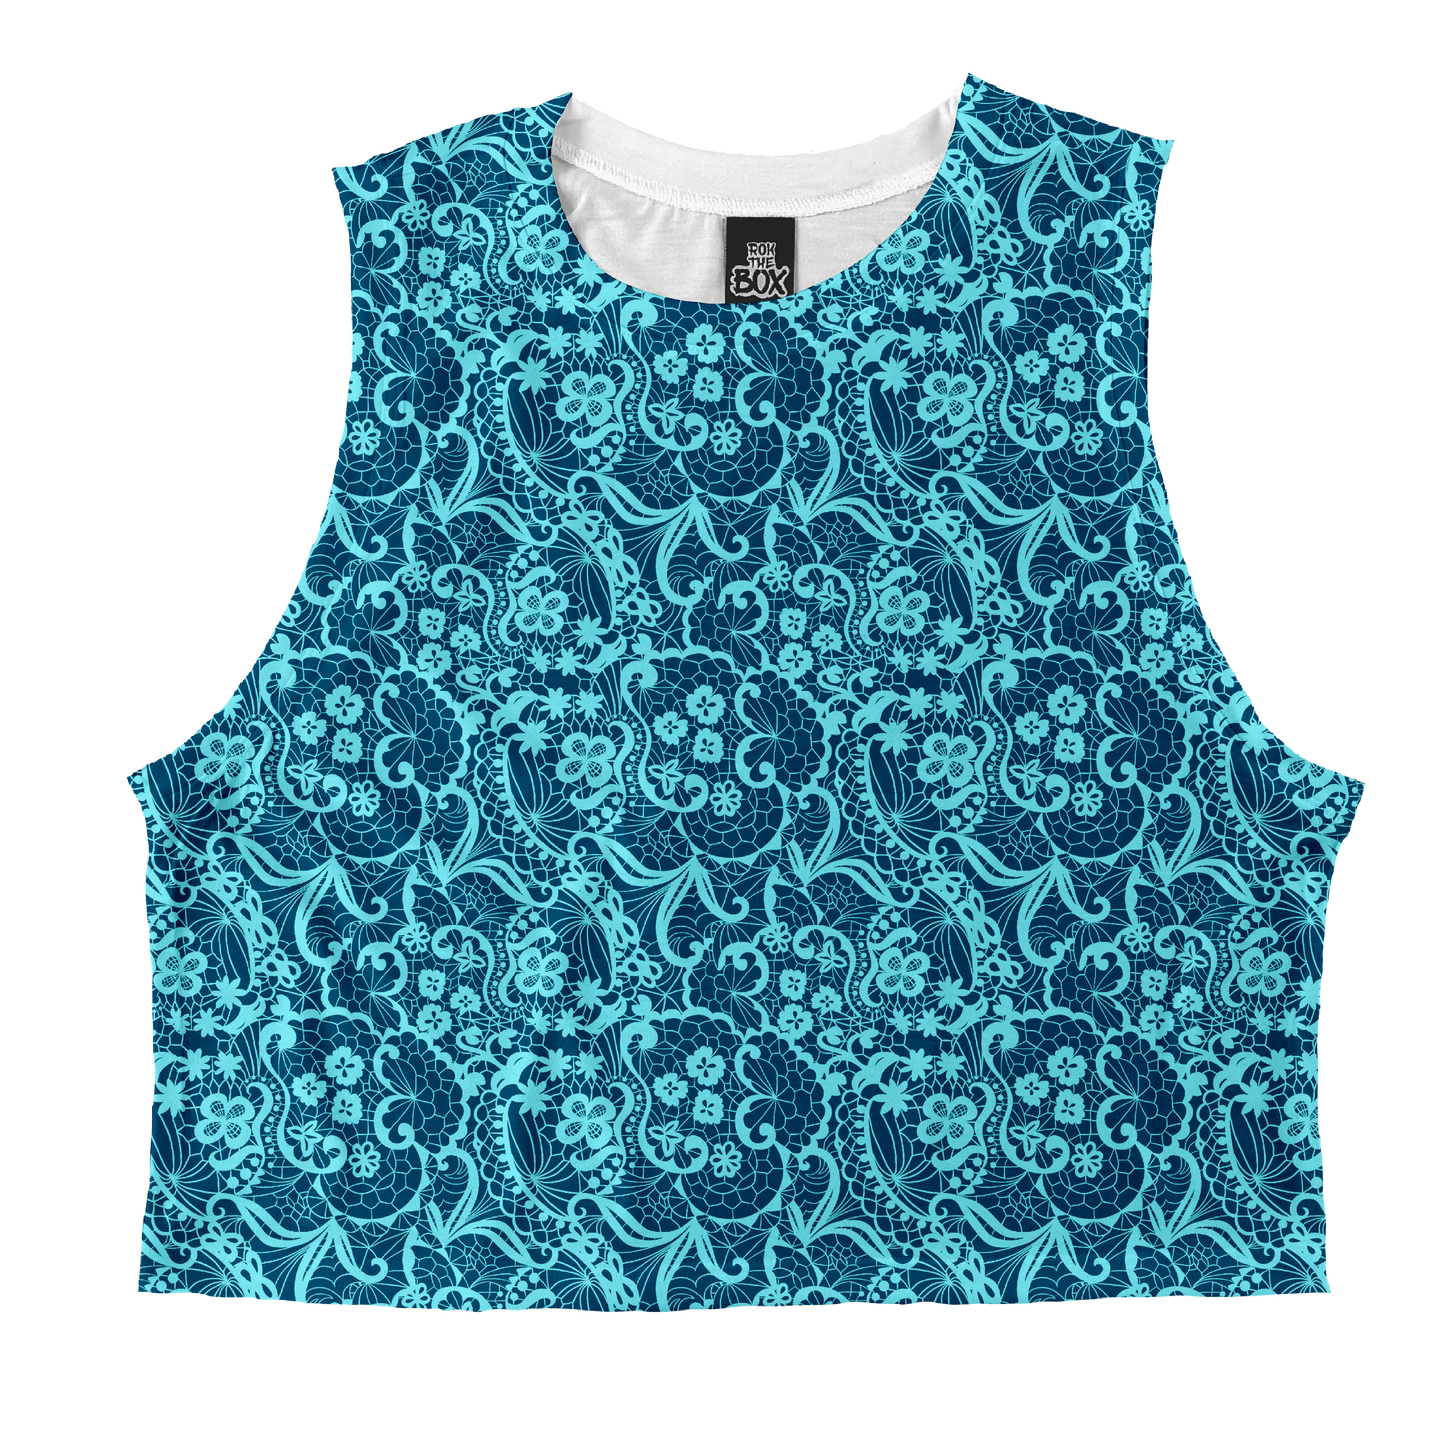 Teal Lace Tops